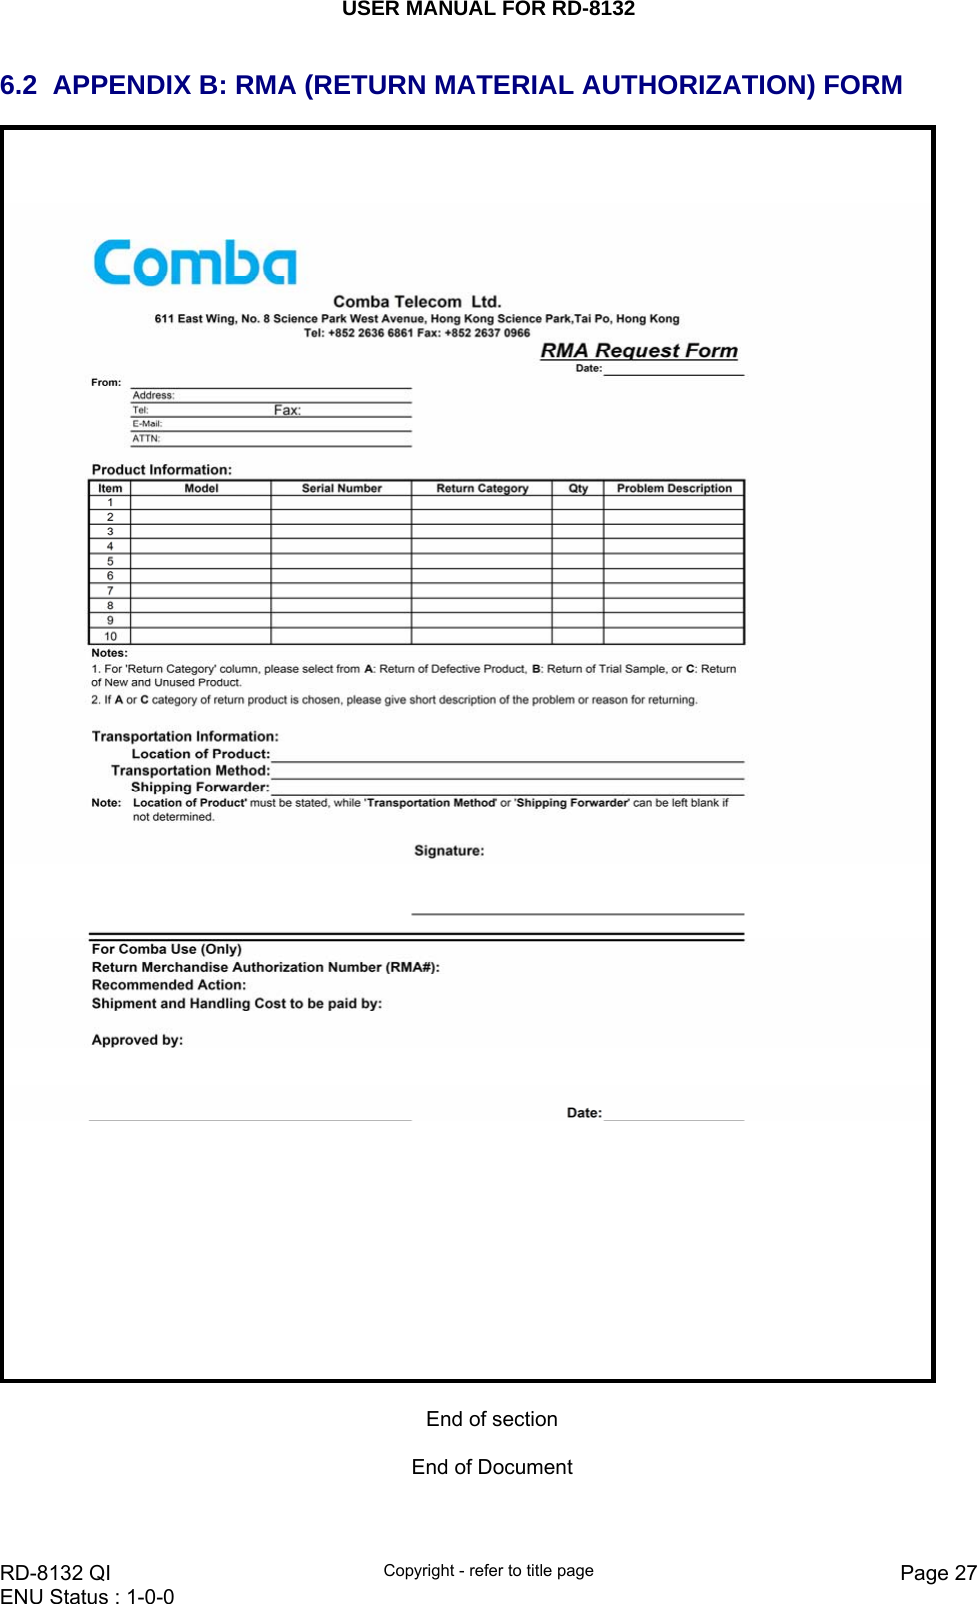 USER MANUAL FOR RD-8132    RD-8132 QI  Copyright - refer to title page  Page 27ENU Status : 1-0-0    6.2  APPENDIX B: RMA (RETURN MATERIAL AUTHORIZATION) FORM   End of section  End of Document 